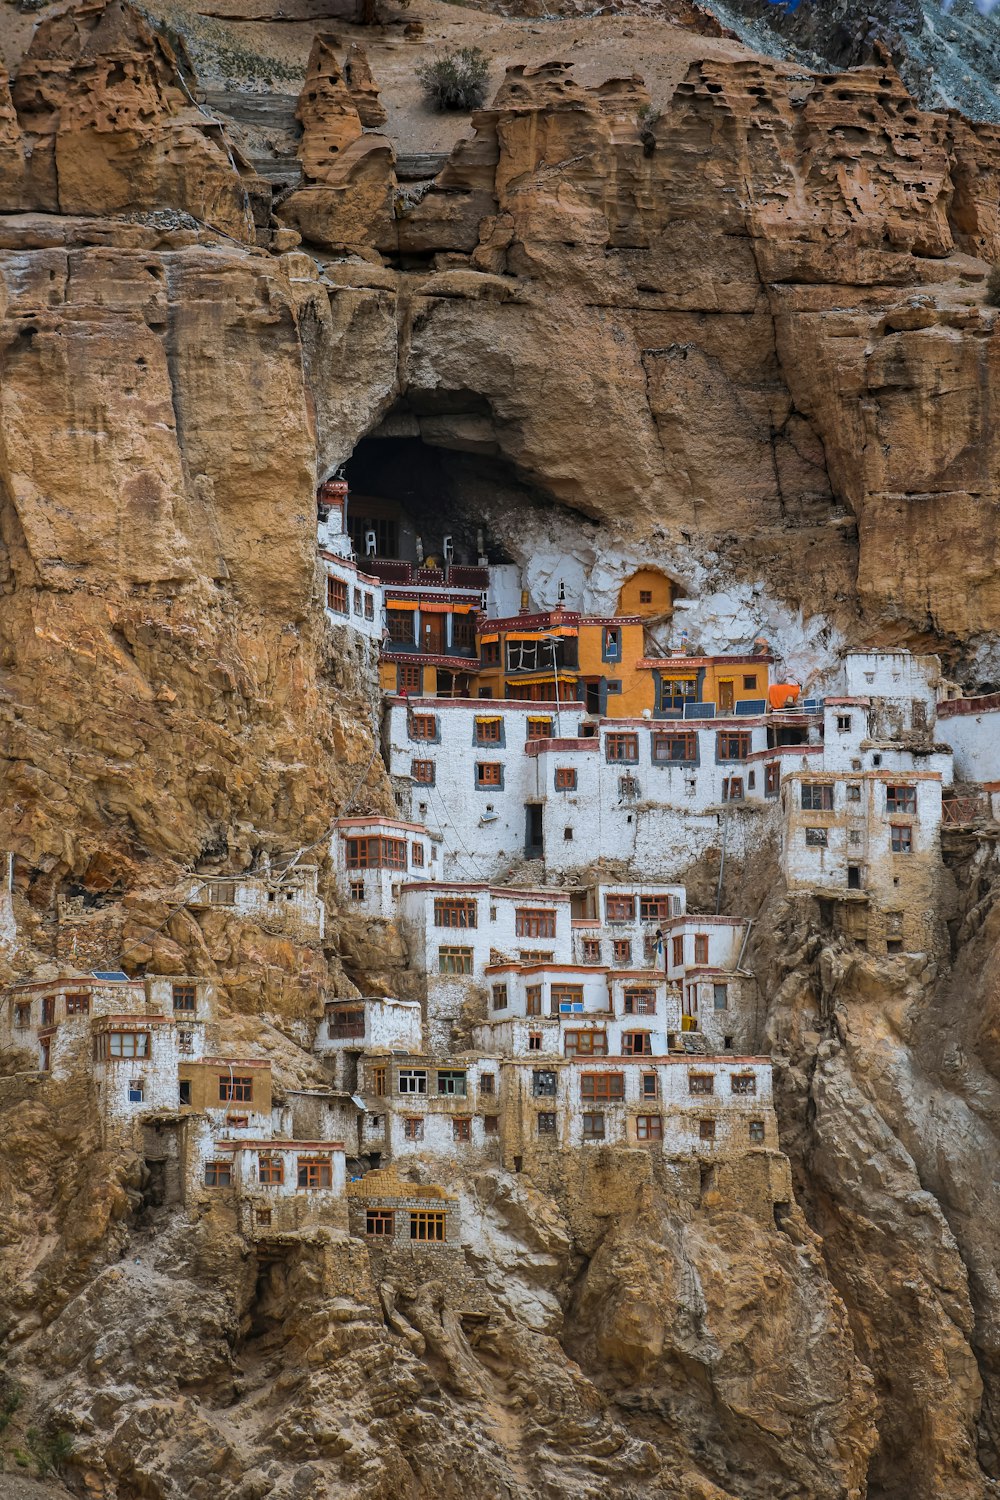 a group of buildings built into the side of a mountain